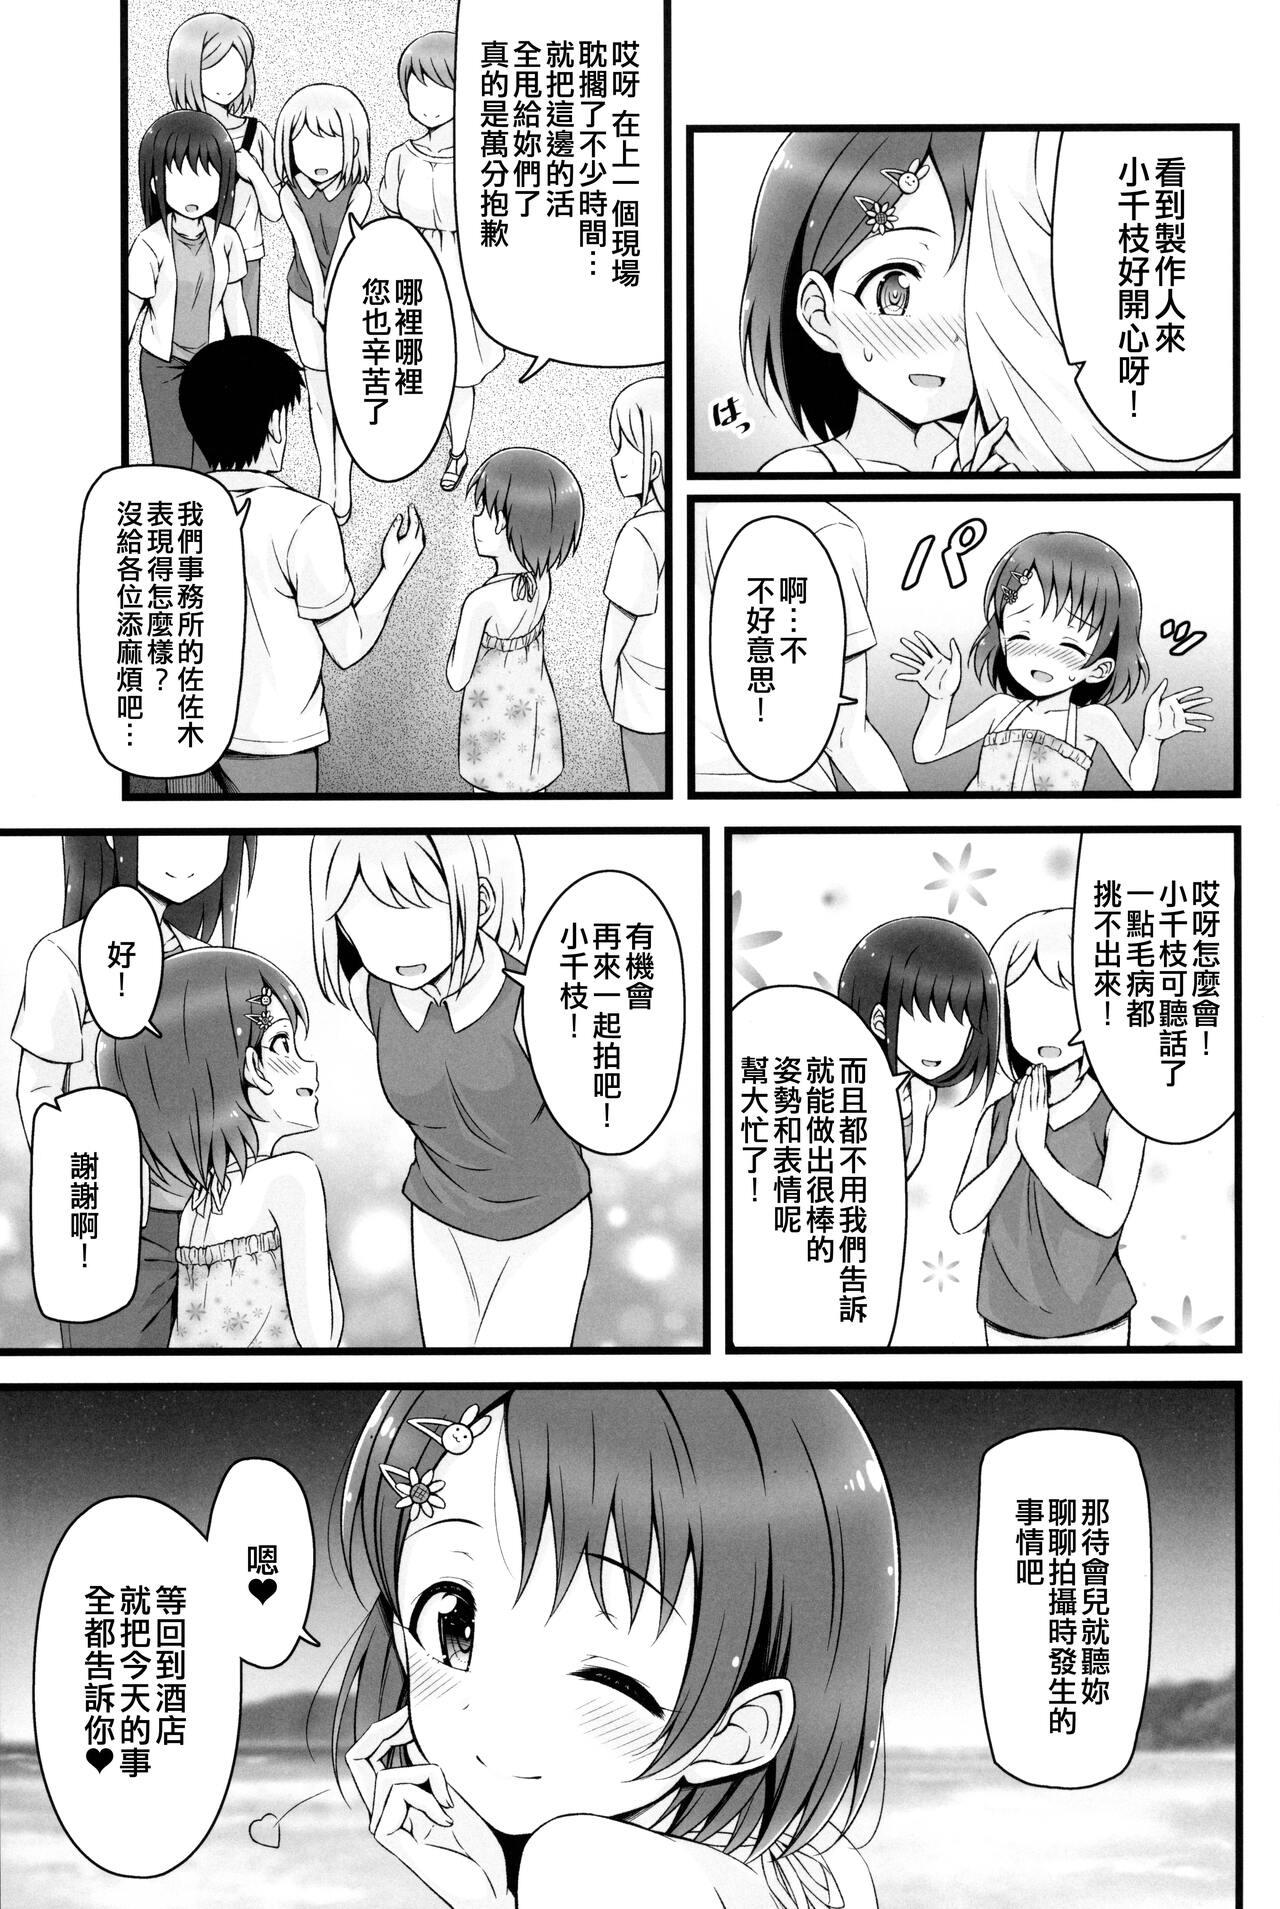 Point Of View Chie, Mou Otona desu. - The idolmaster Mmf - Page 5